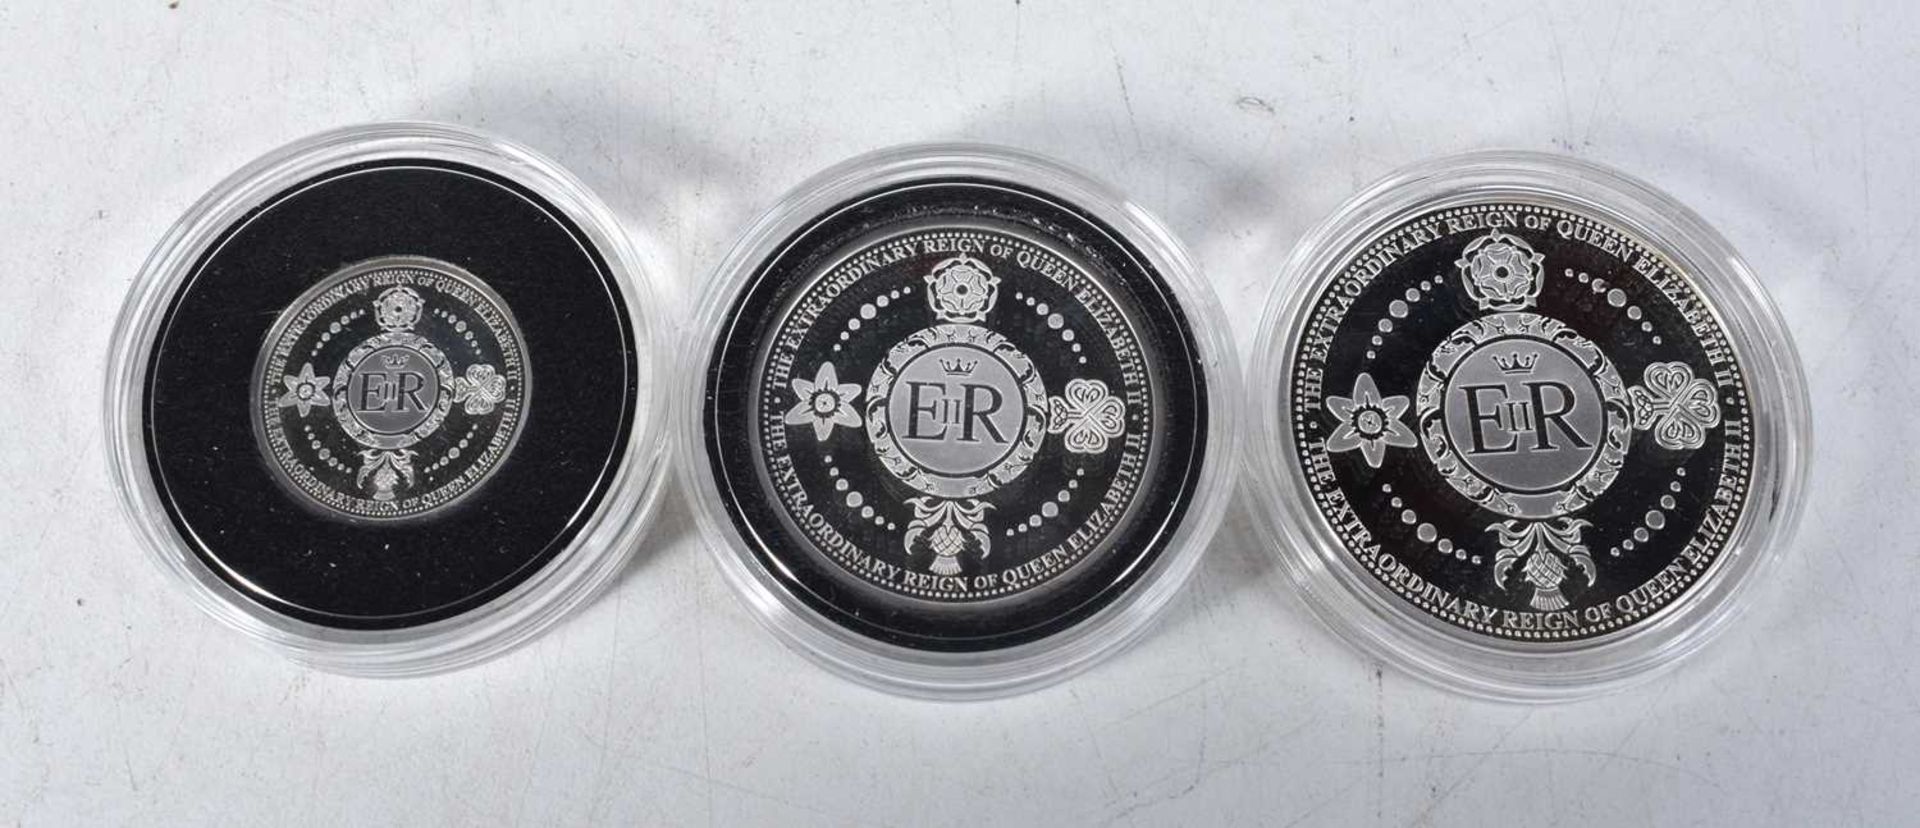 SOLOMON ISLANDS 2022 QEII PLATINUM JUBILEE SILVER PROOF THREE COIN SET, INCLUDES THE FIVE DEOLLARS - Image 2 of 3